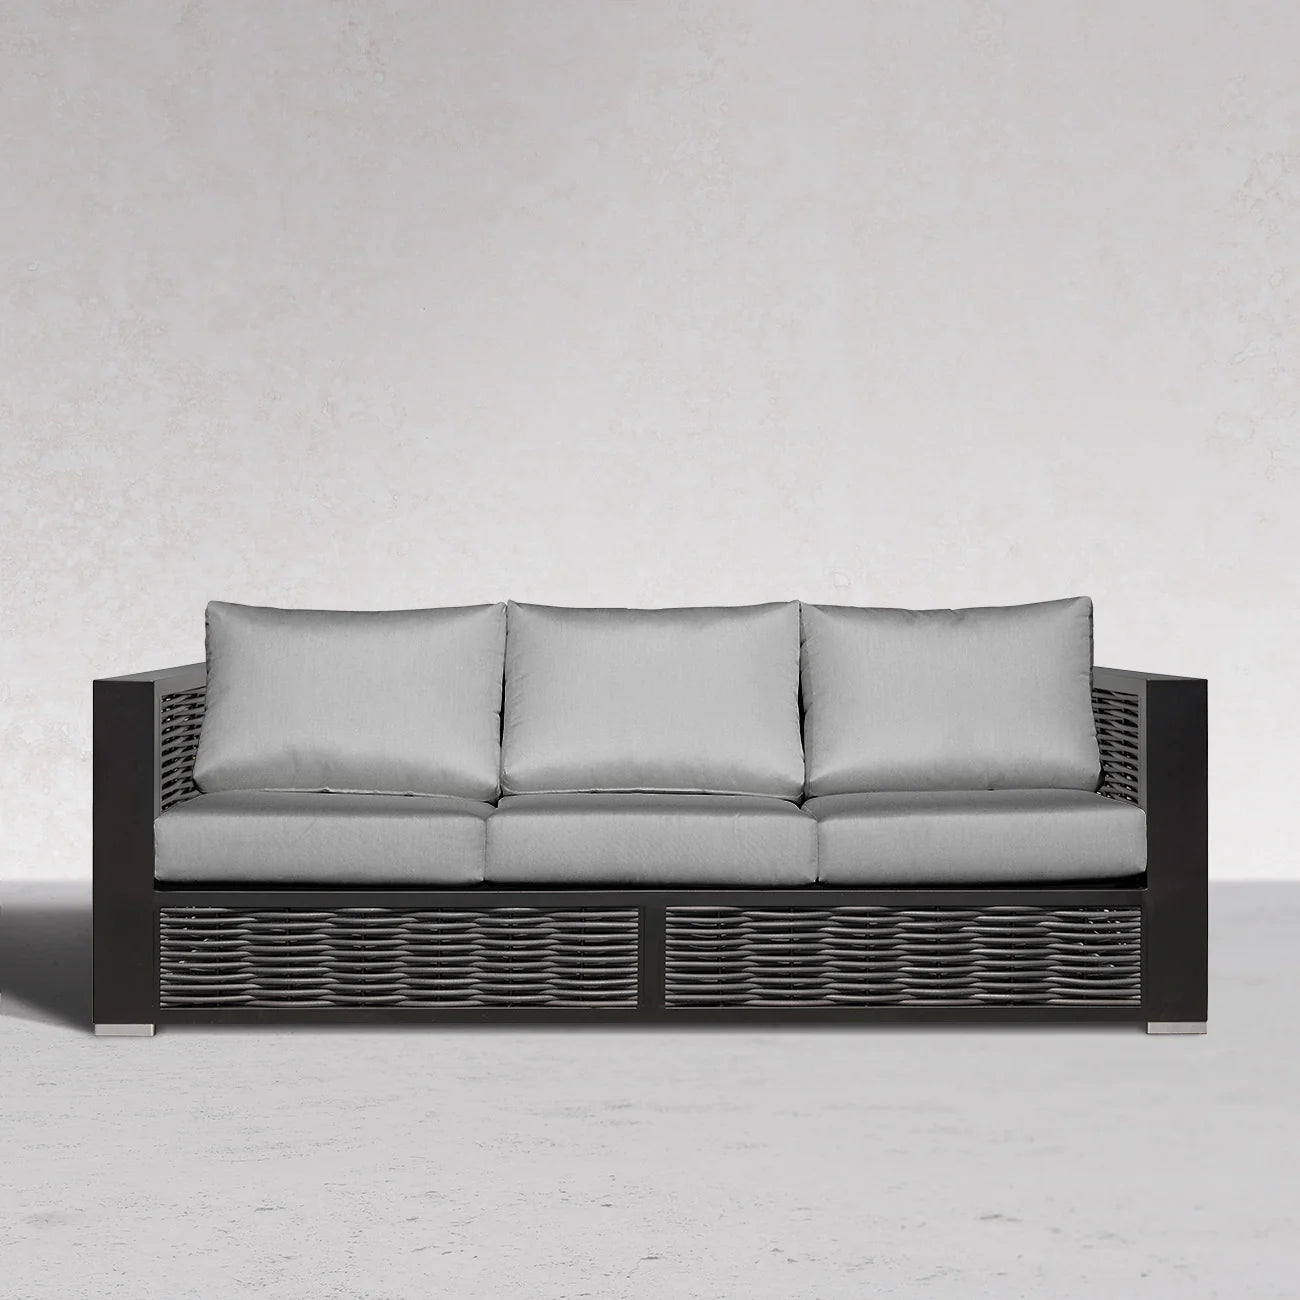 Chestnut Lux Sofa Collection With Sunbrella Fabric